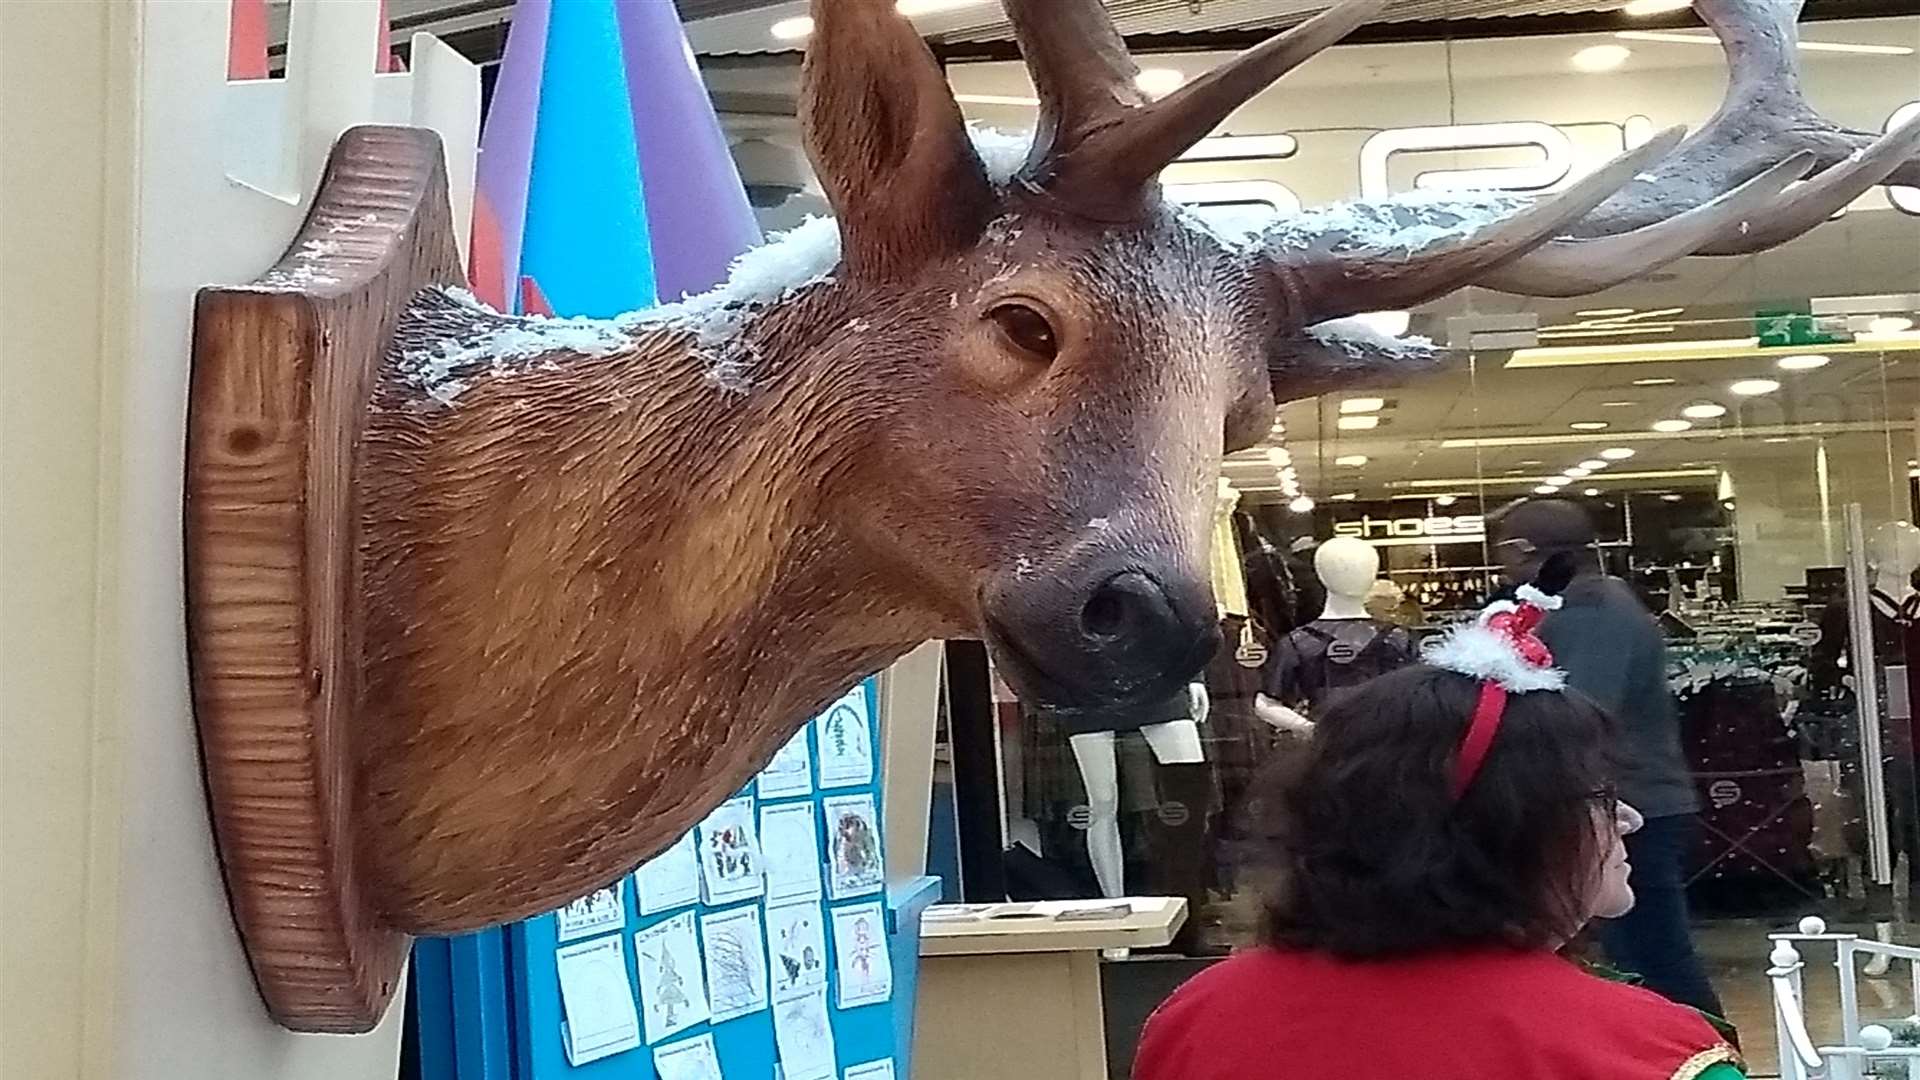 The reindeer was removed following a shopper's complaint